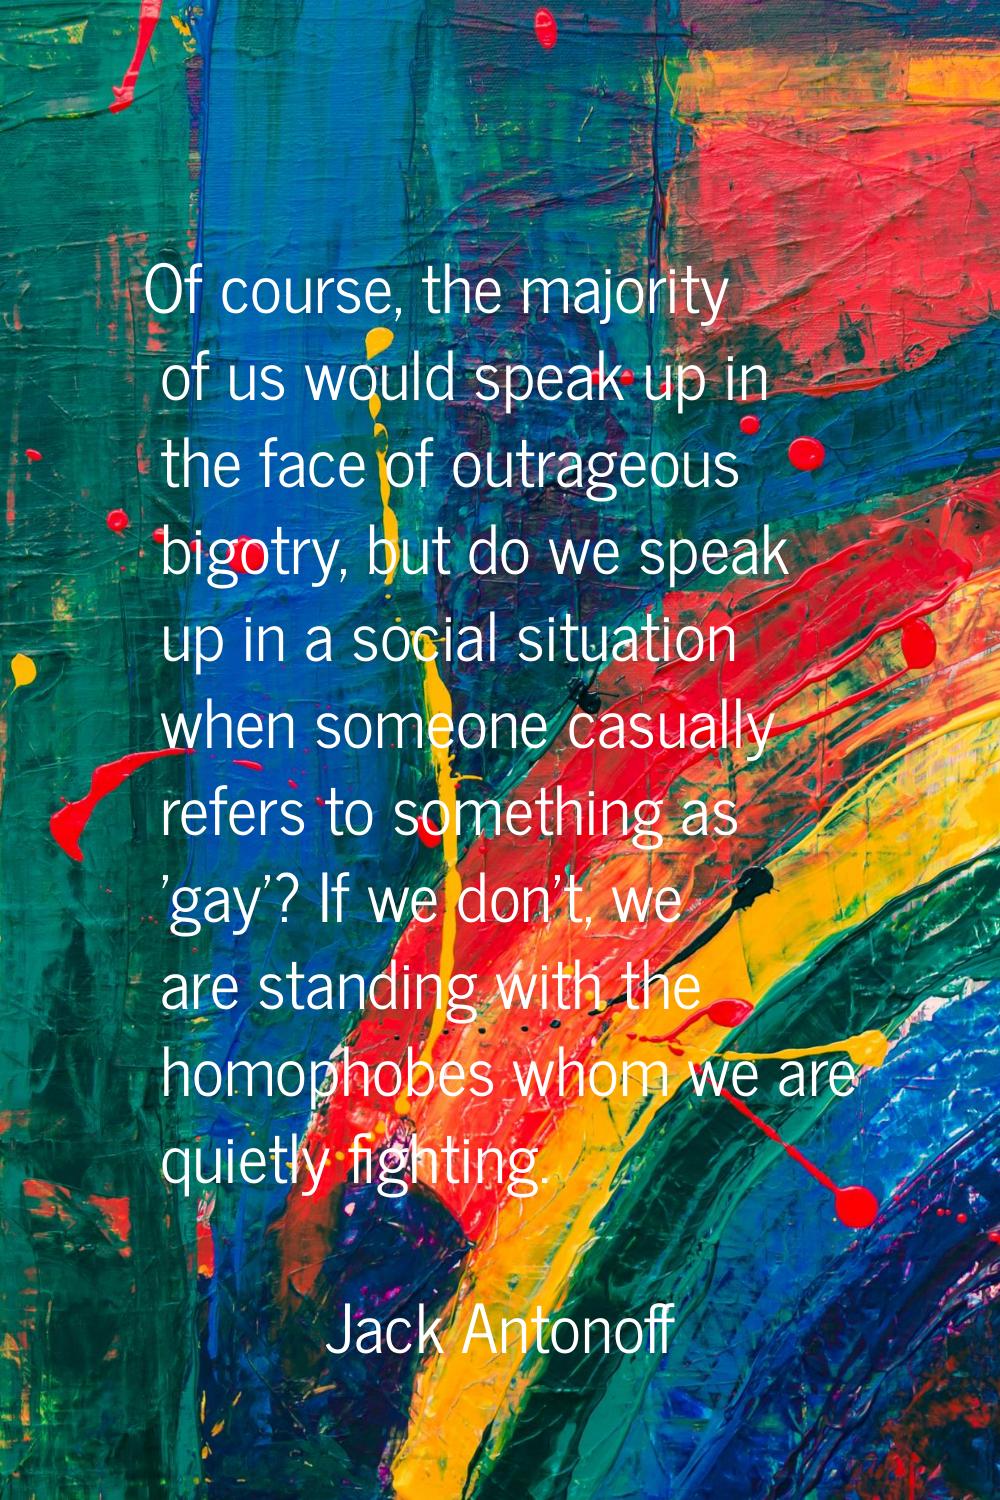 Of course, the majority of us would speak up in the face of outrageous bigotry, but do we speak up 